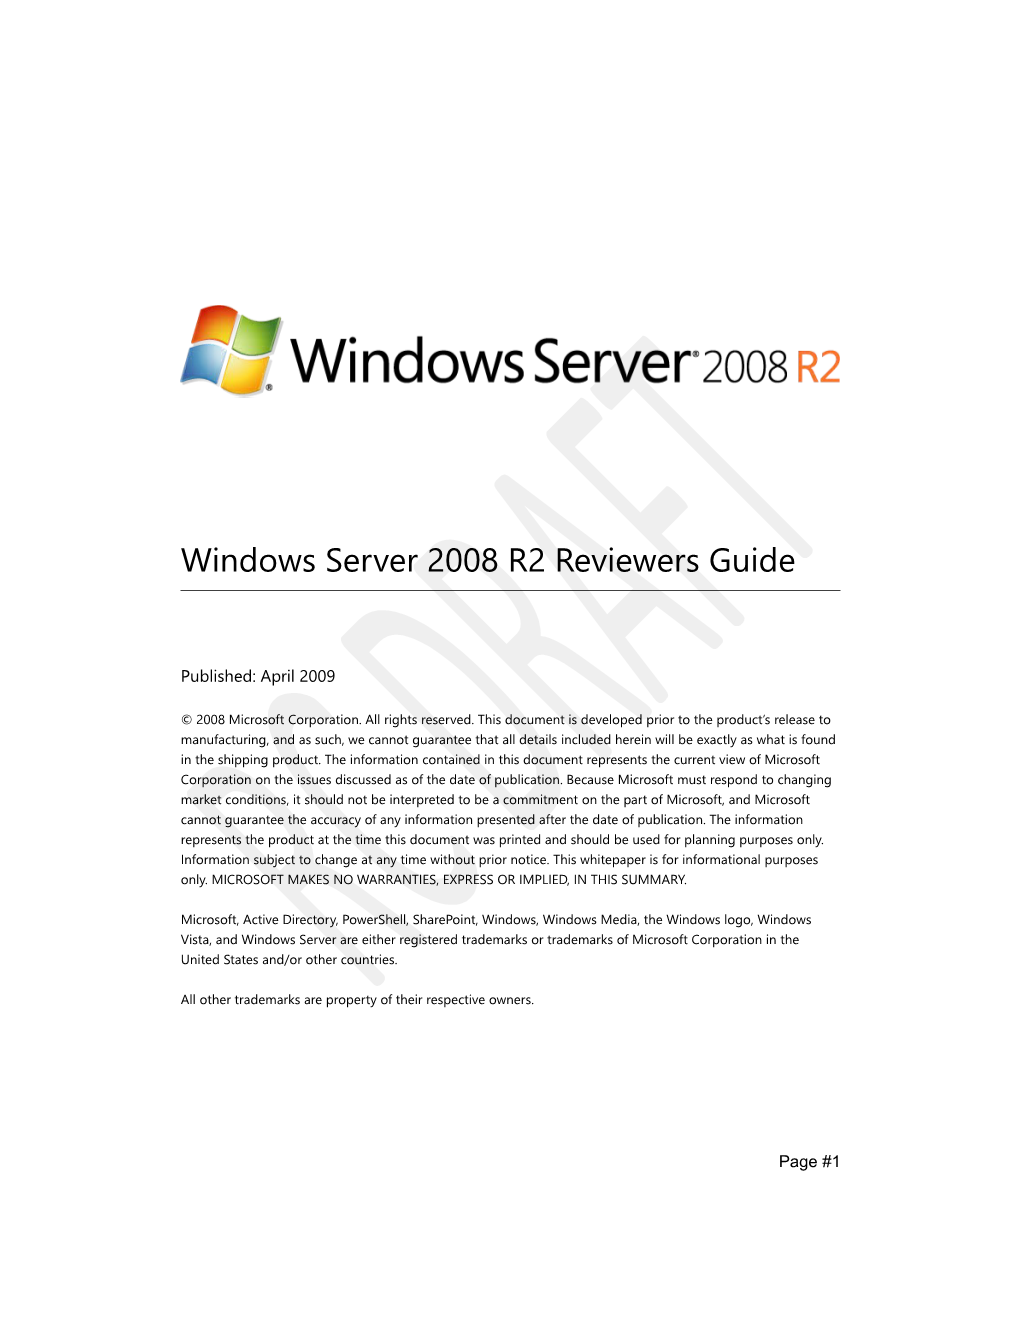 Windows Server 2008 R2 Reviewers Guide